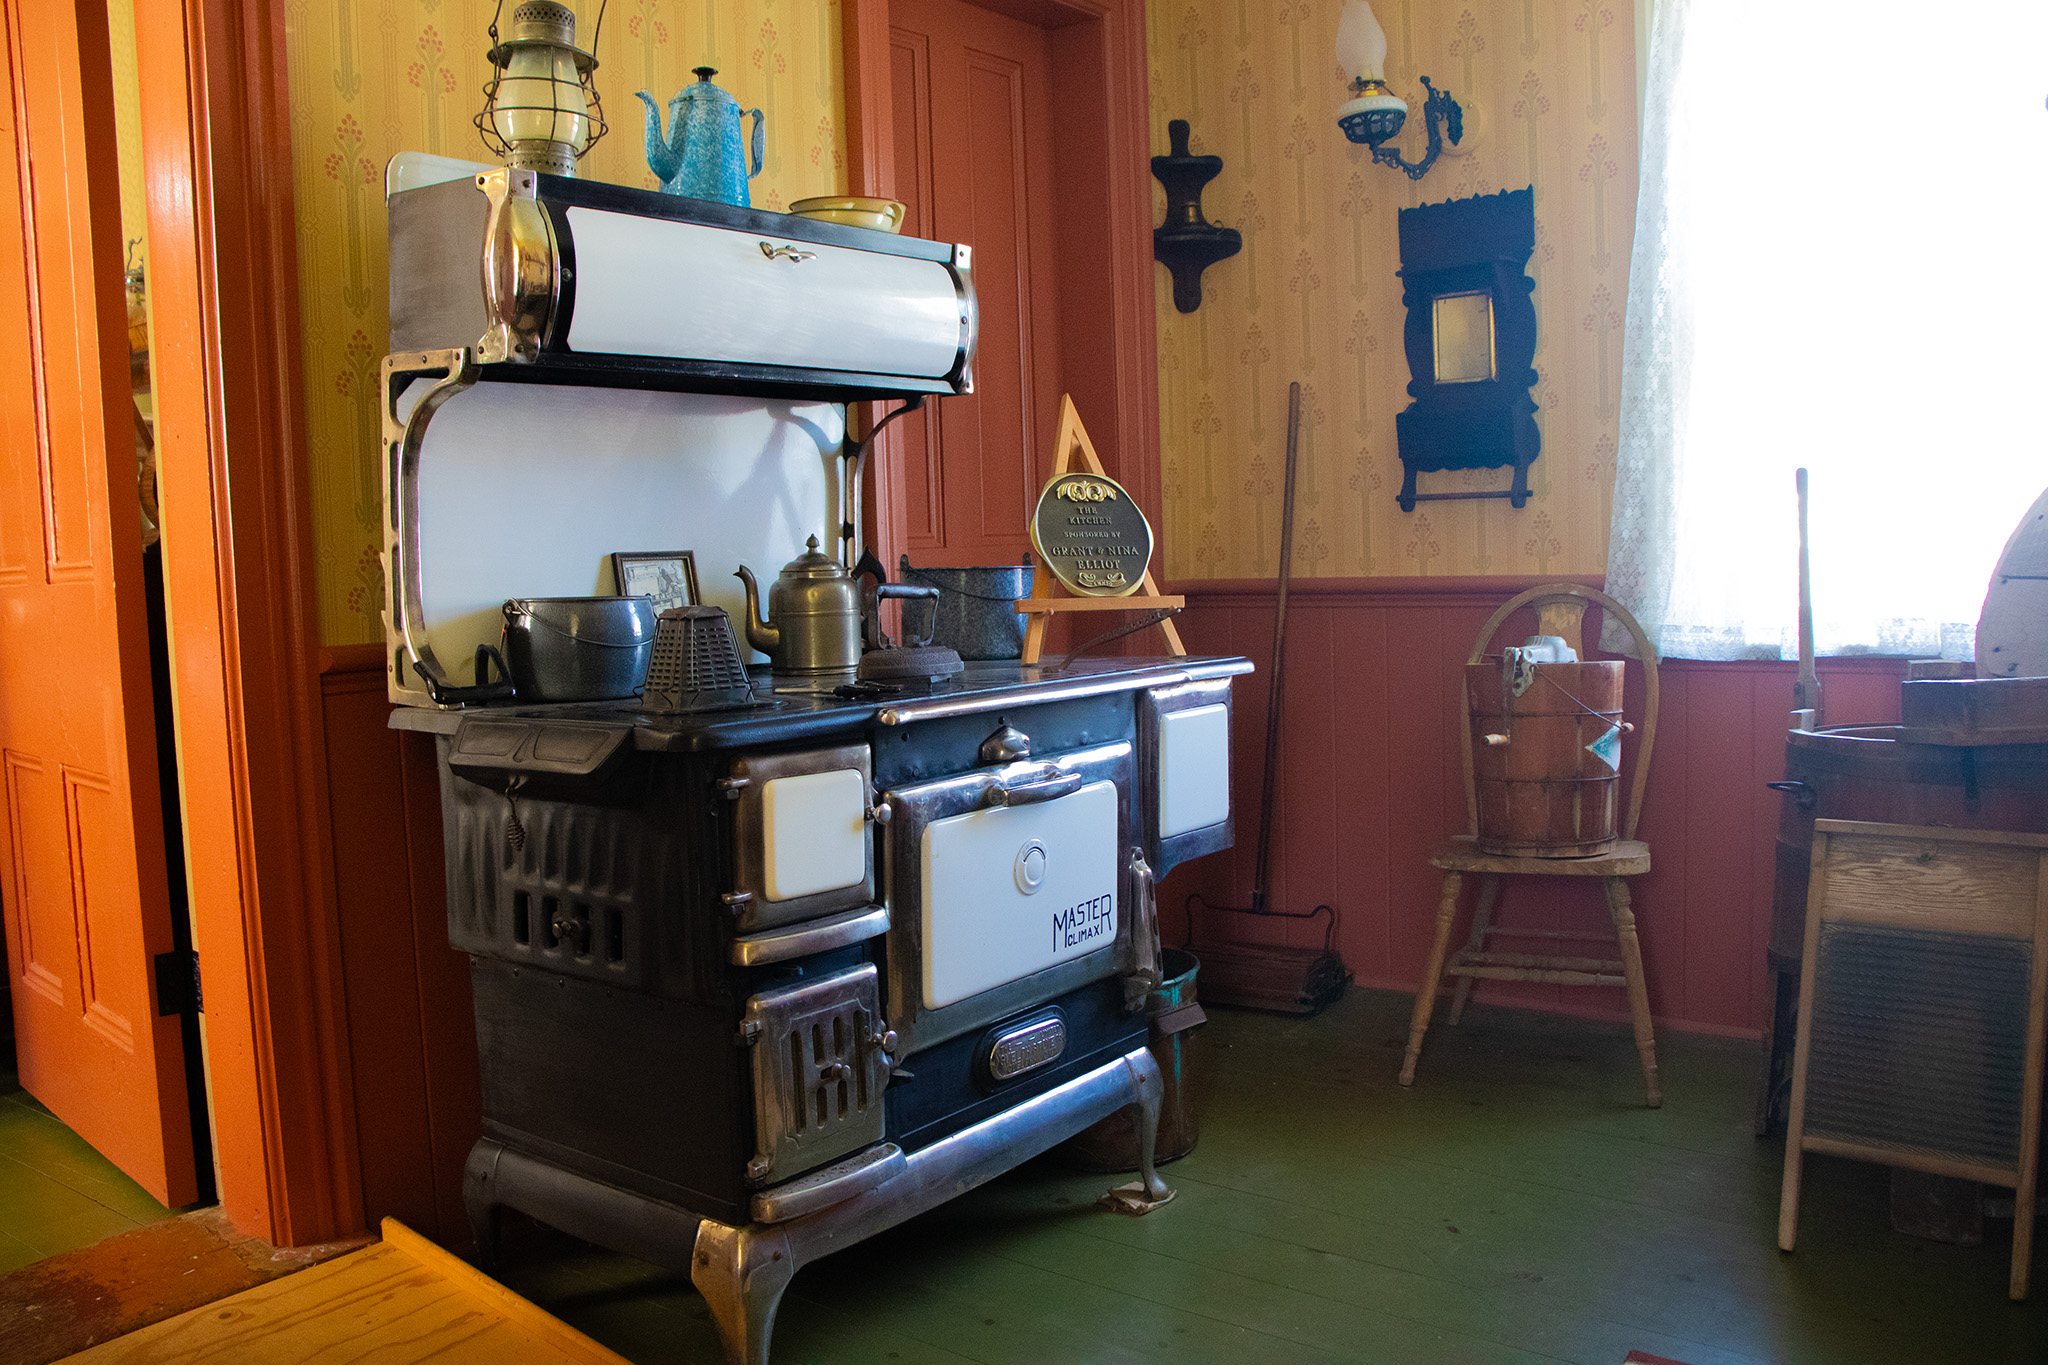 Image of the kitchen inside Lucy Maud Montgomery's Leaskdale Manse